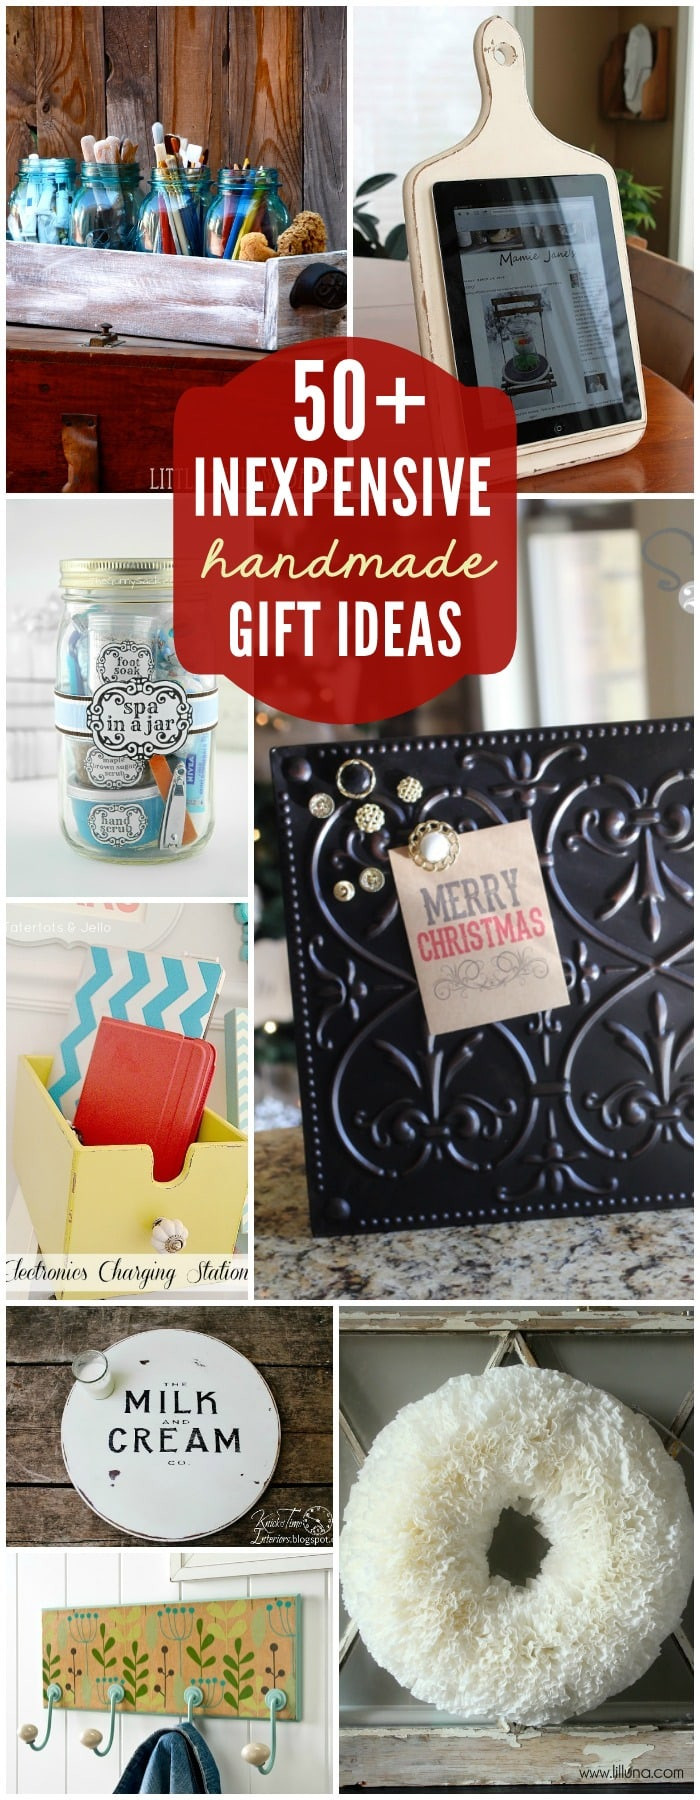 Christmas Gifts DIY Cheap
 Inexpensive Birthday Gift Ideas